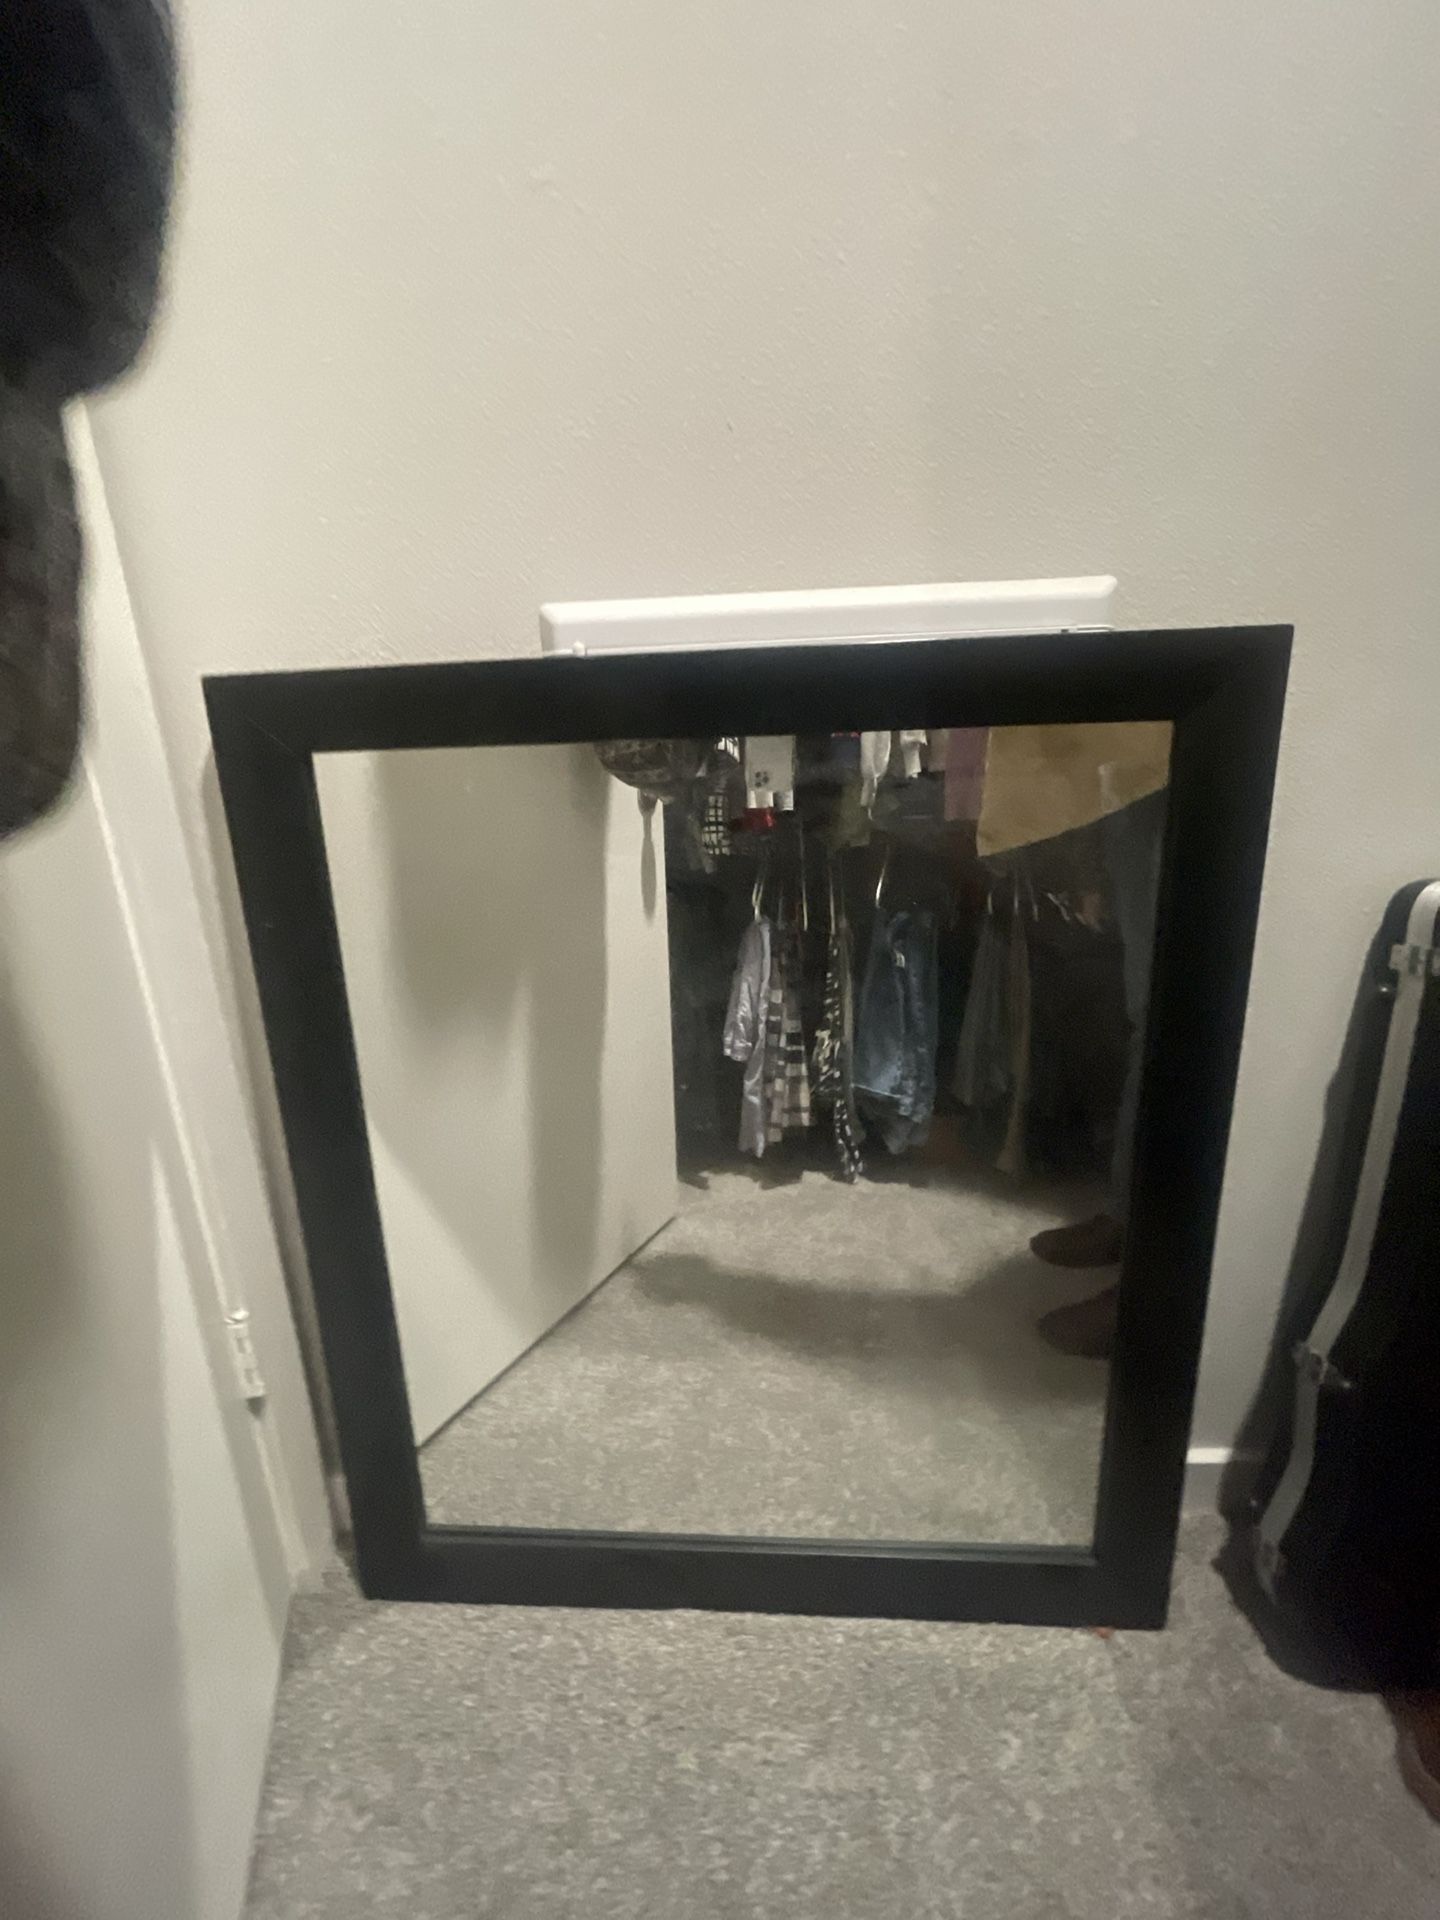 Matching Mirror to previous post